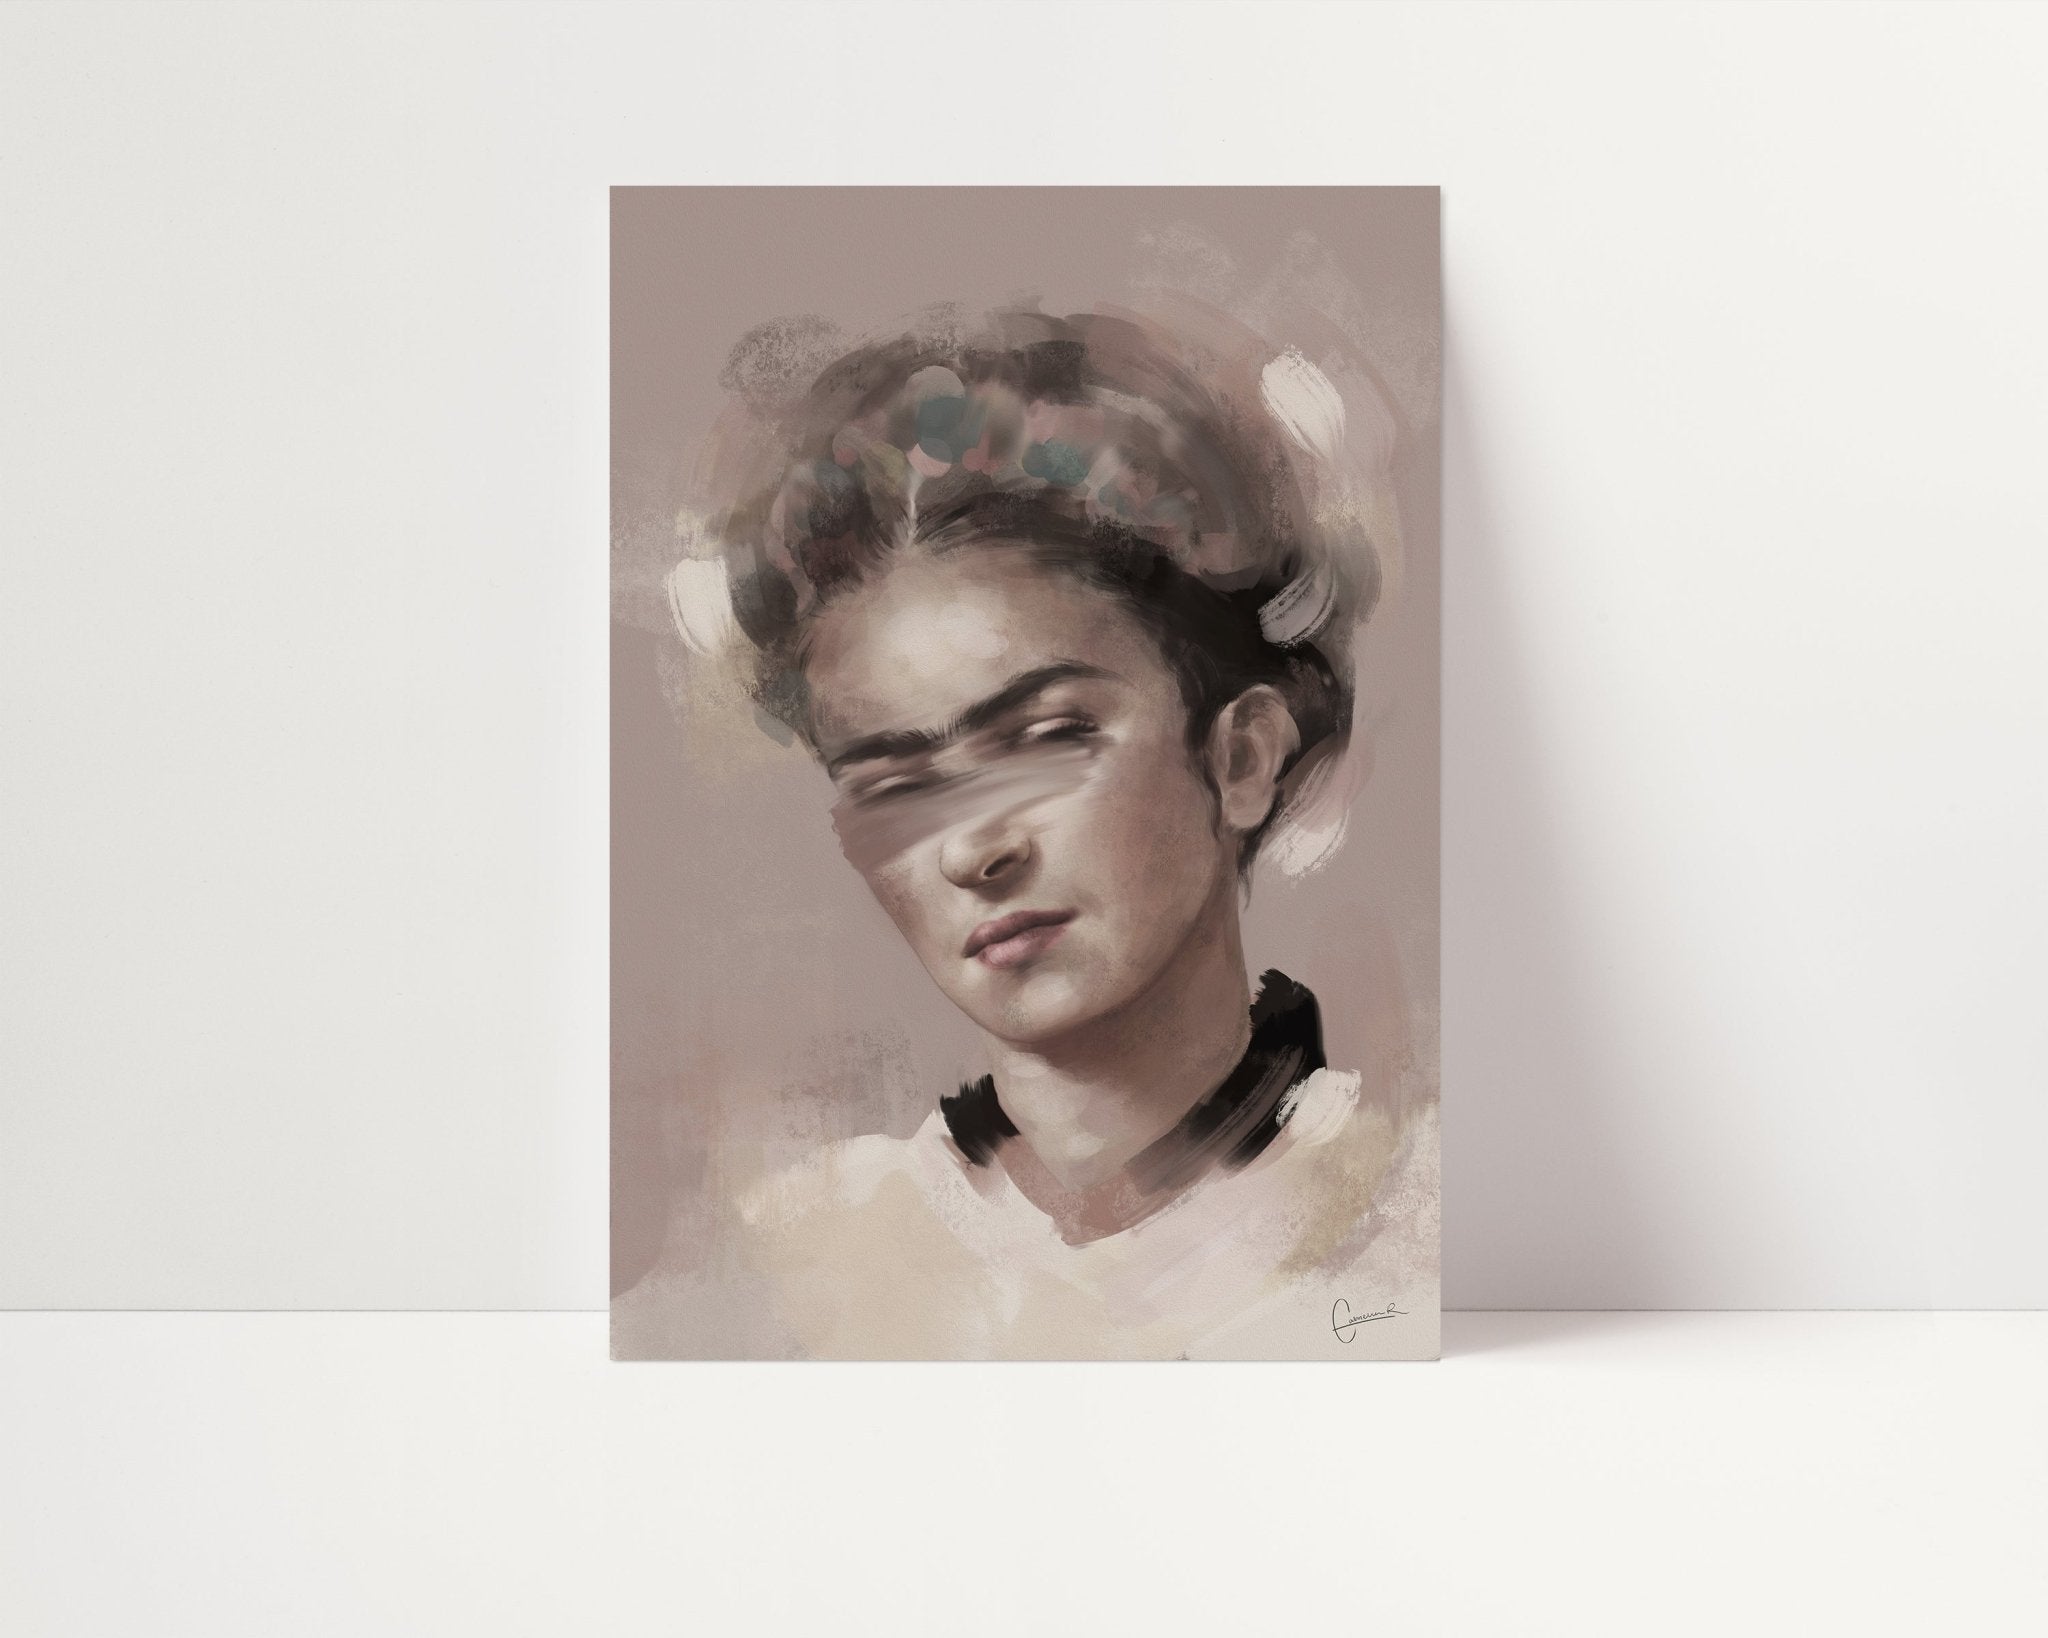 Frida Kahlo Abstract Poster - D'Luxe Prints